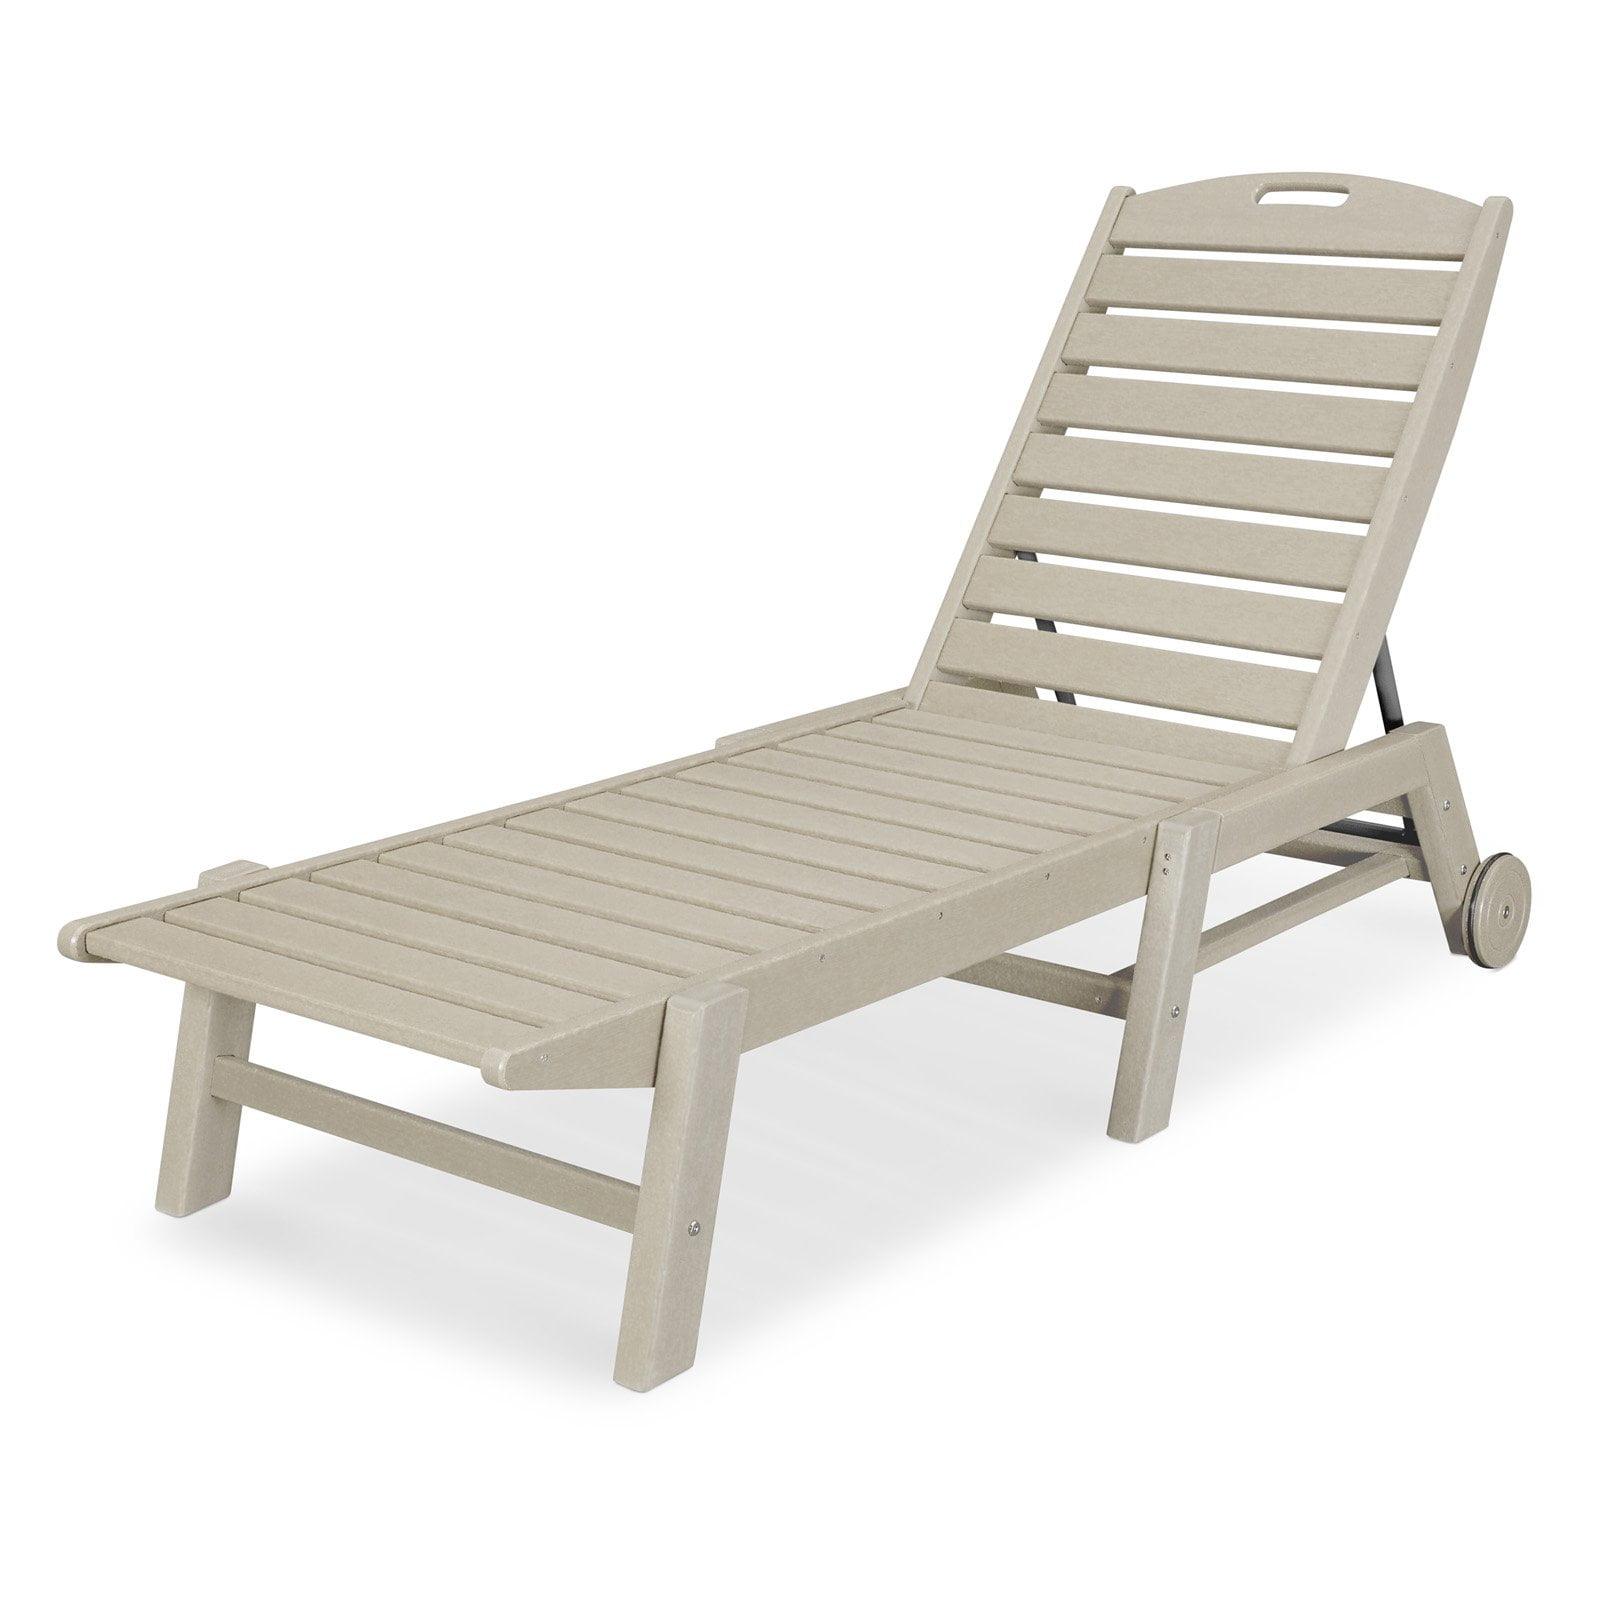 Eco-Friendly Sand POLYWOOD Nautical Chaise Lounge with Wheels